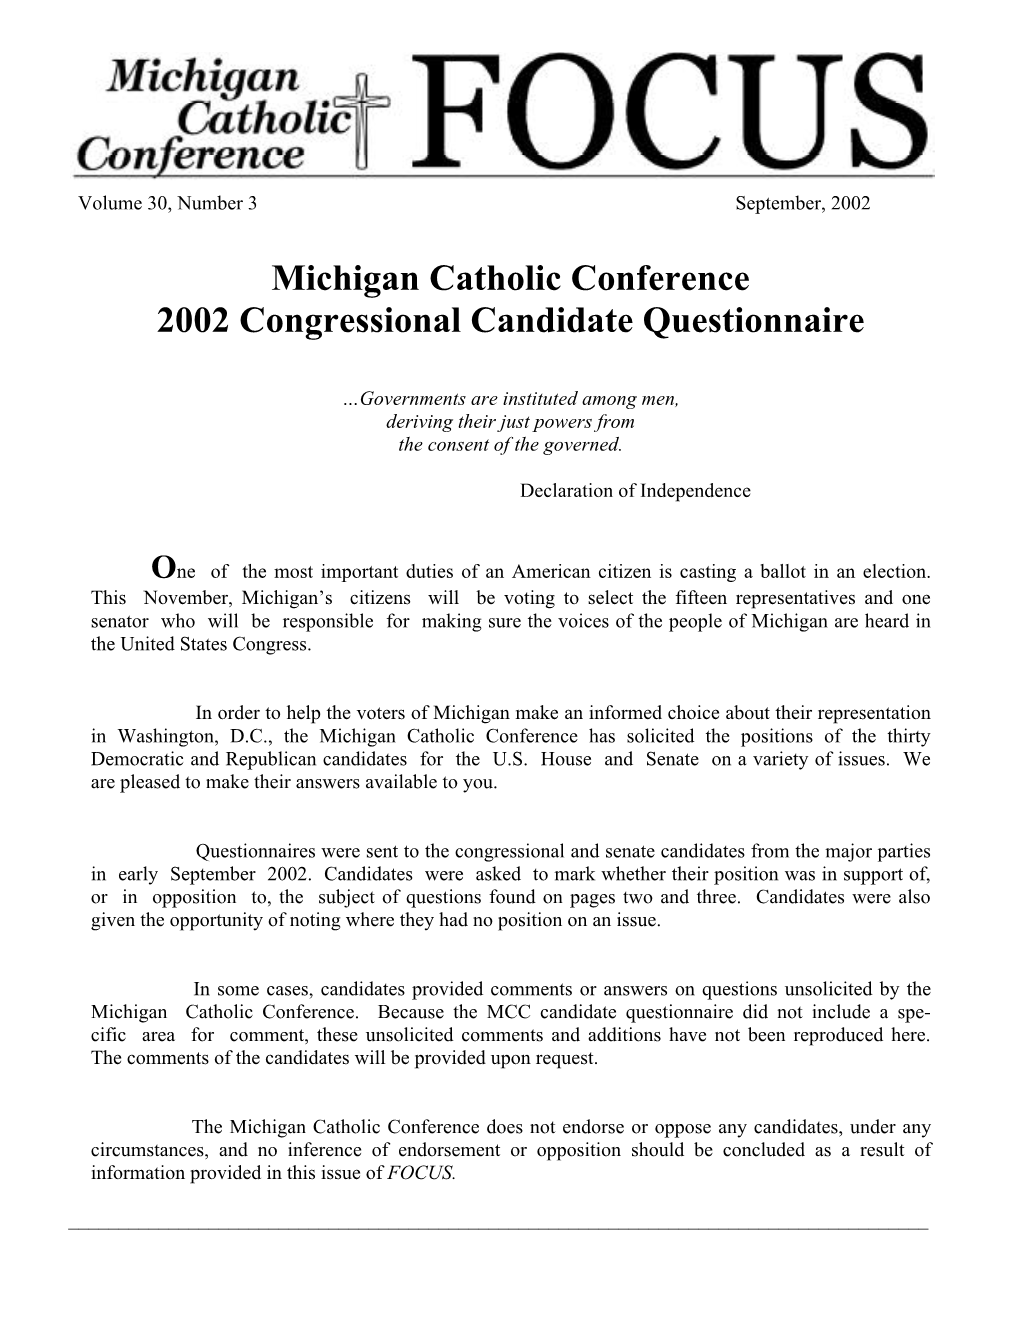 Michigan Catholic Conference 2002 Congressional Candidate Questionnaire